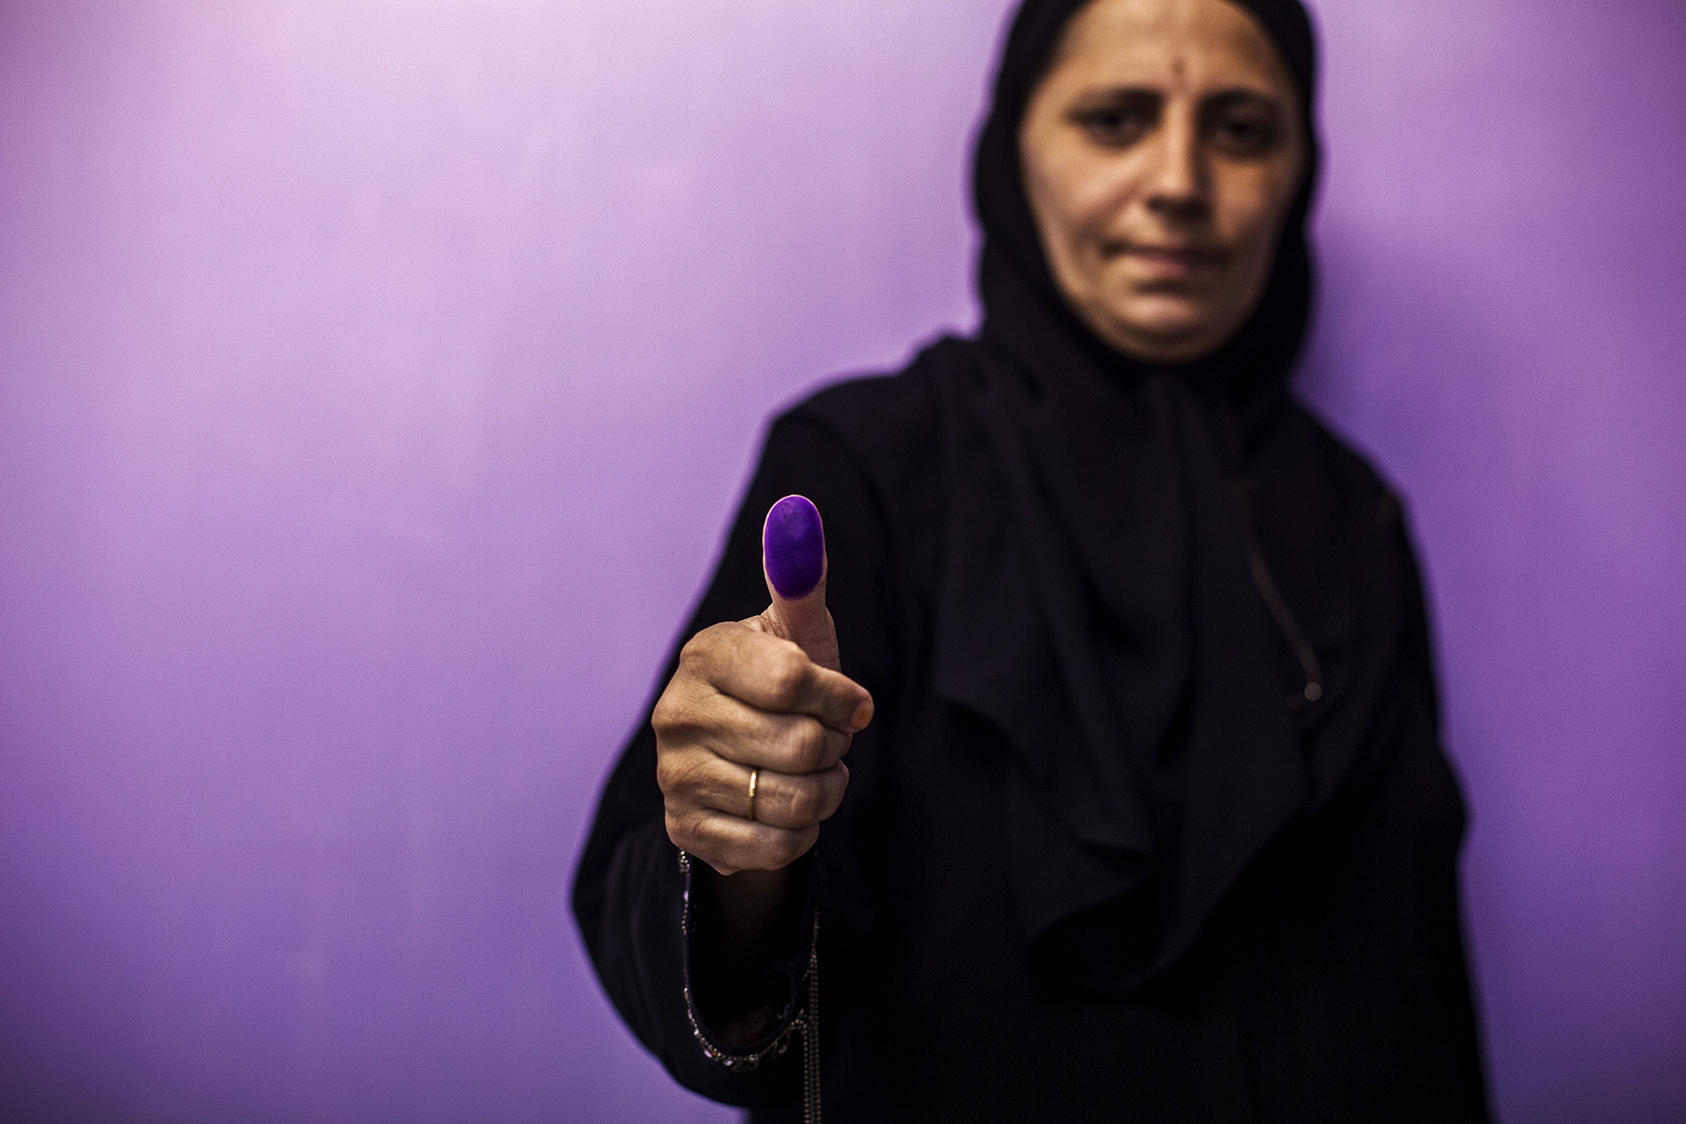 A woman shows her ink-covered thumb after casting her vote at a polling station during a repeat of the parliamentary election in Karachi, Pakistan, May 19, 2013. (Diego Ibarra Sanchez/The New York Times)